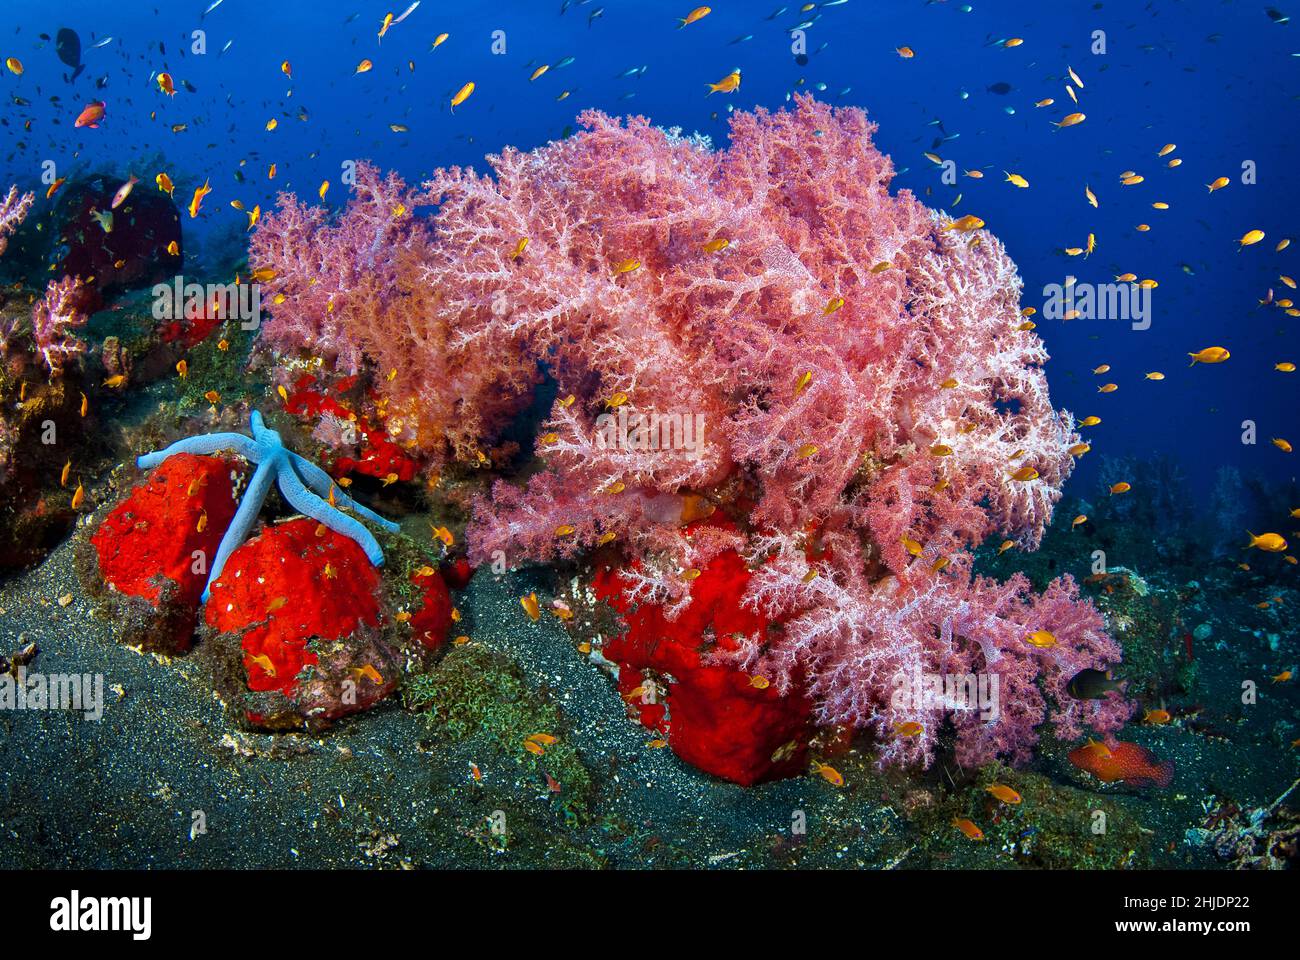 Dark volcanic substrate further emphasizes the brillinat colors of these pink soft corals, Dendronepthya sp., red encrusting sponge, and Blue Sea Star Stock Photo